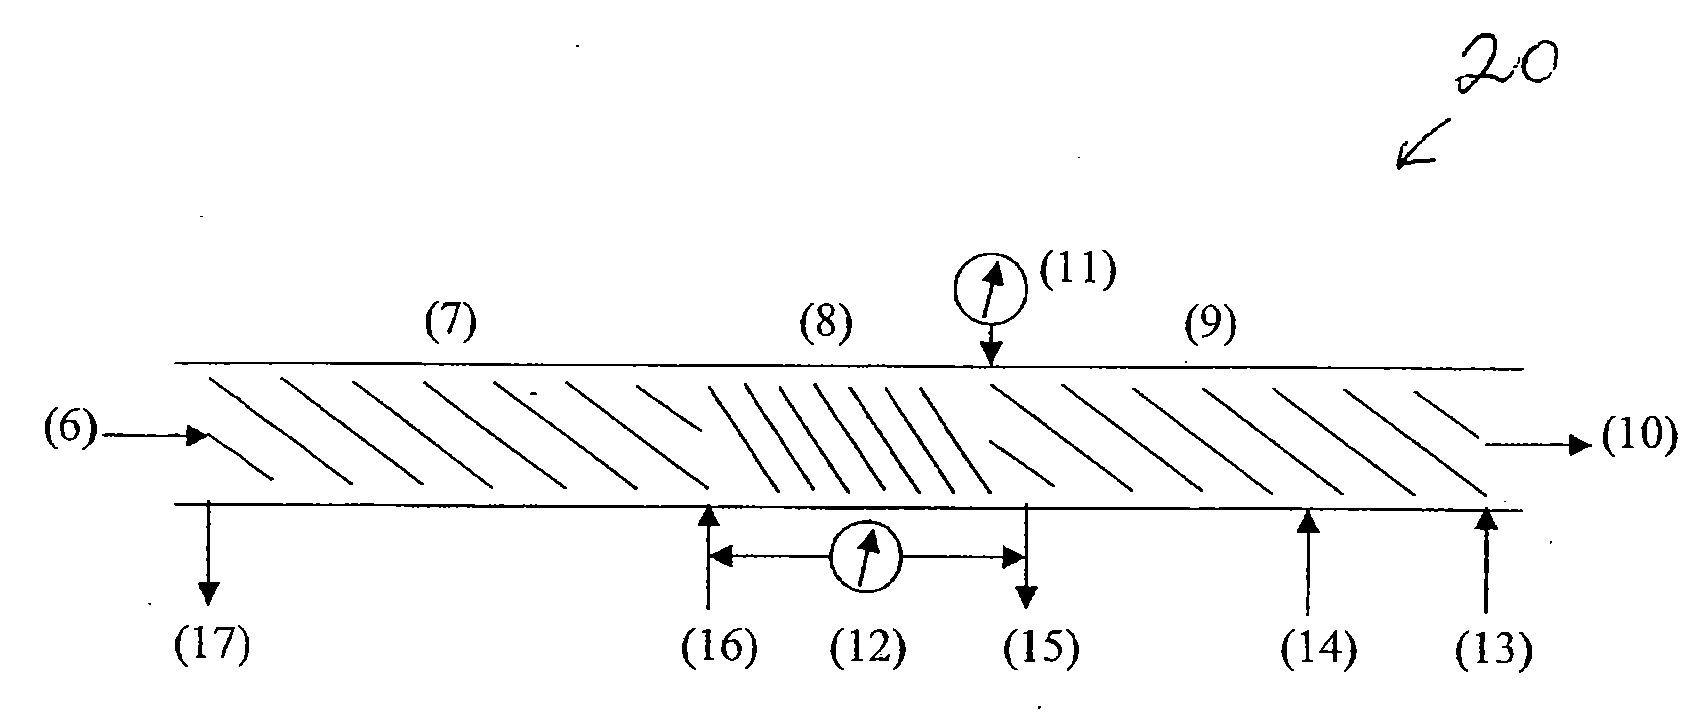 Moving bed biomass fractionation system and method